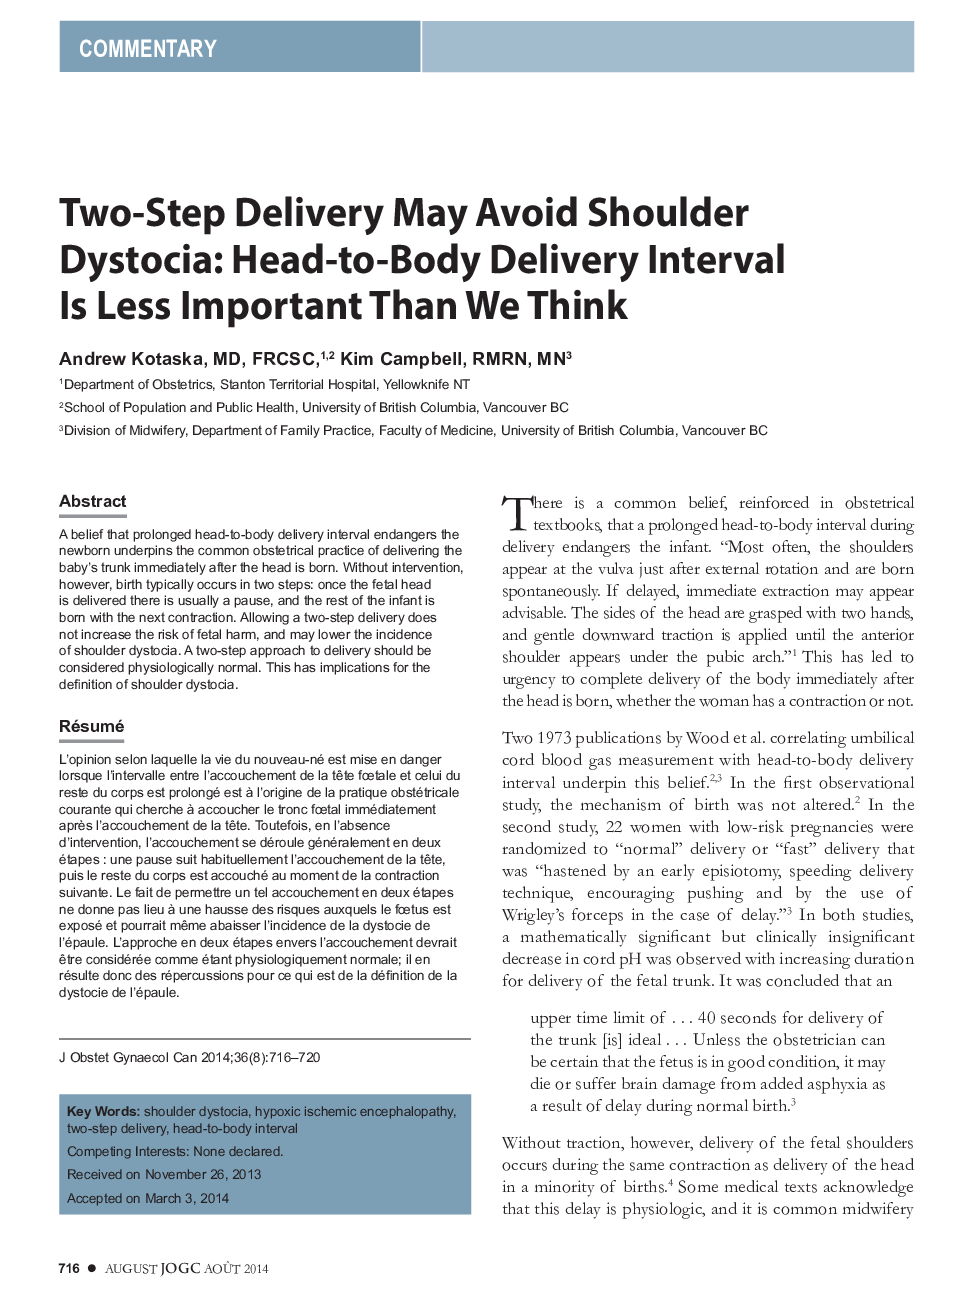 Two-Step Delivery May Avoid Shoulder Dystocia: Head-to-Body Delivery Interval Is Less Important Than We Think